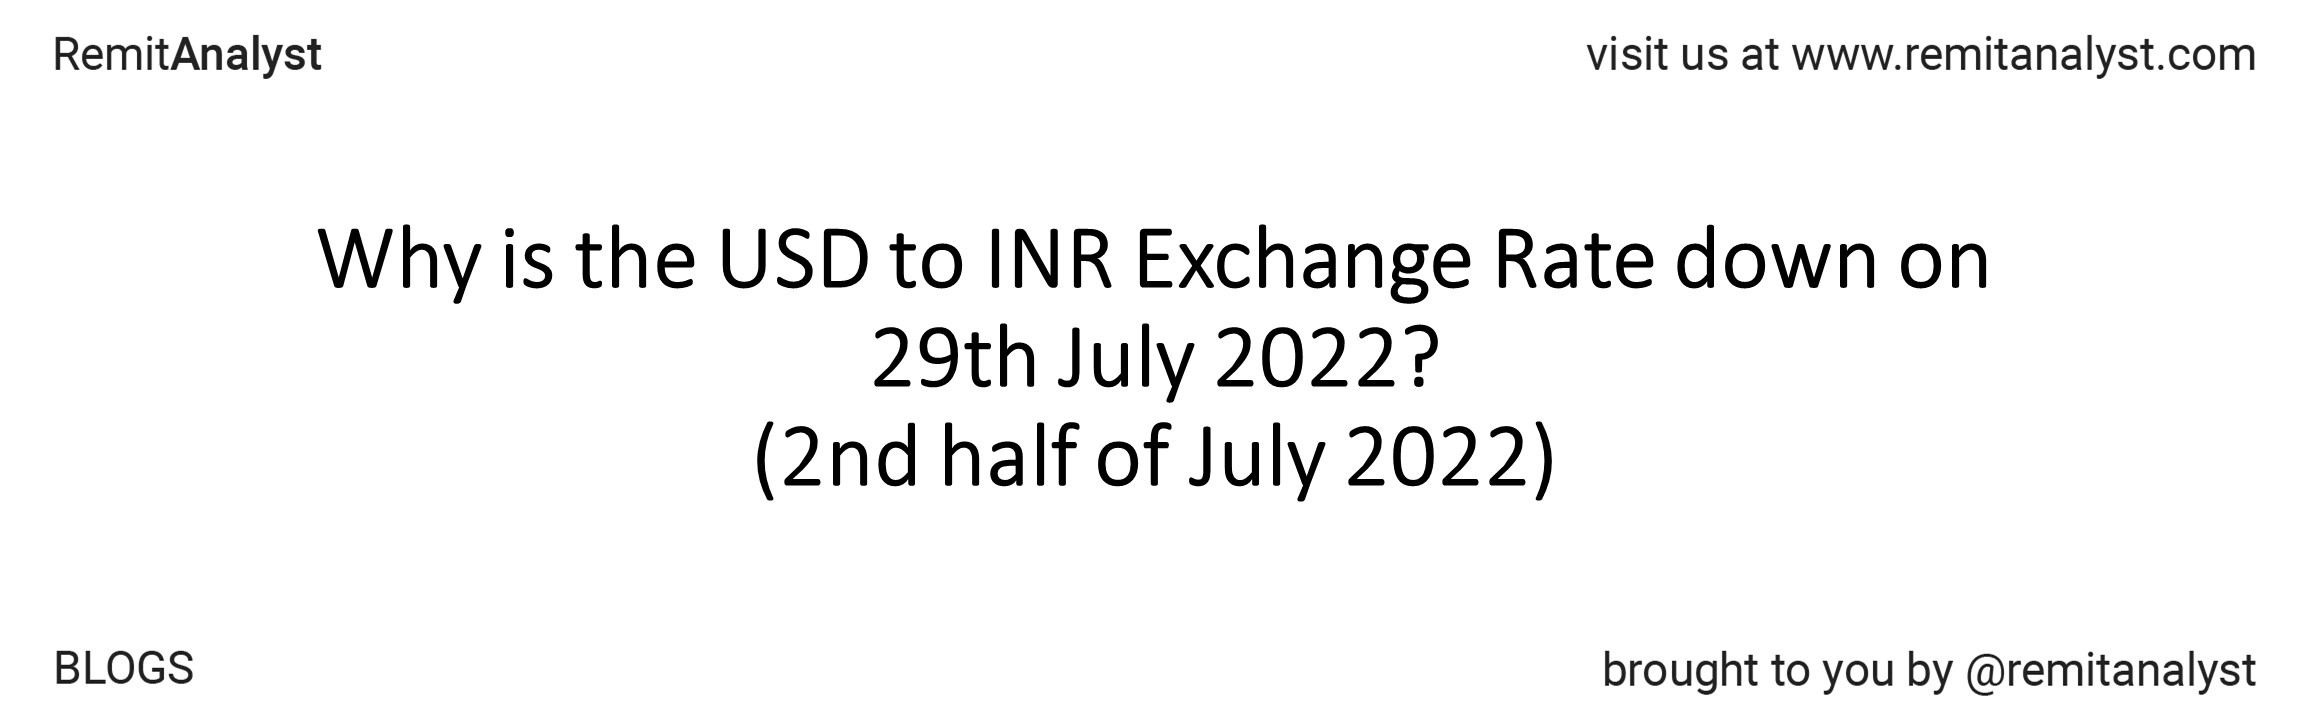 usd-to-inr-exchange-rate-19-July-2022-to-29-July-2022_title 